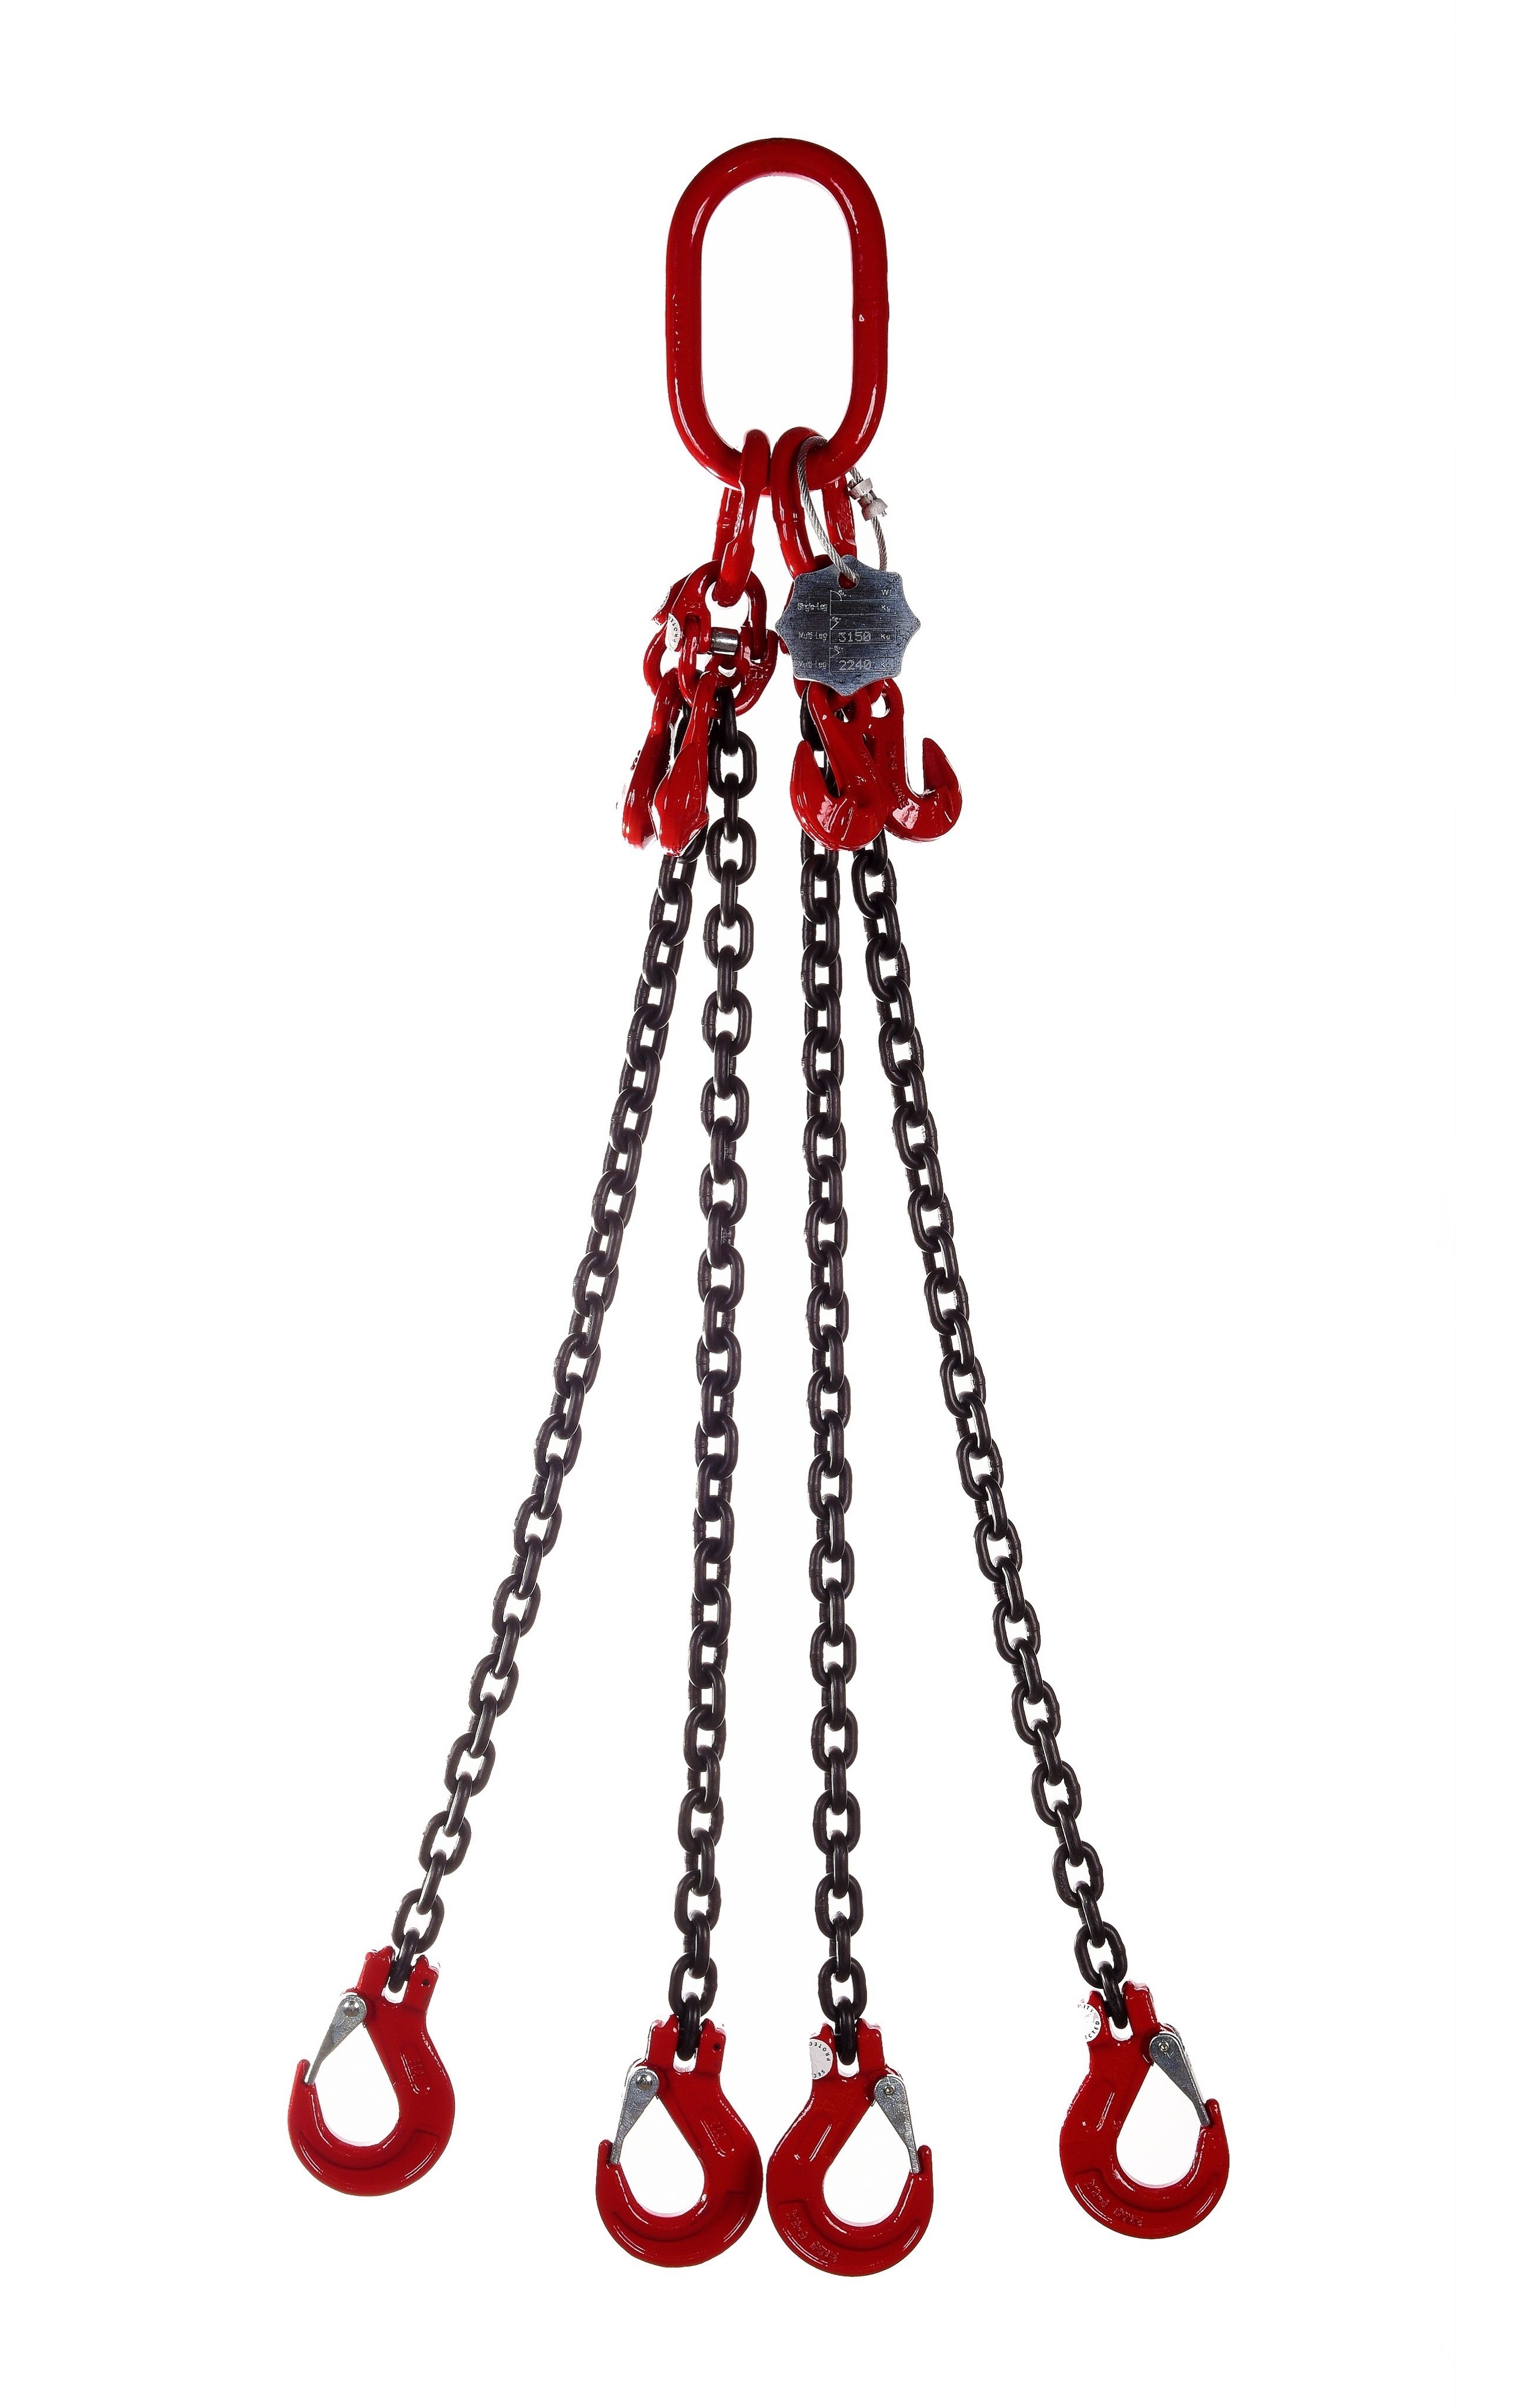 4 Leg 23.6tonne 19mm Lifting Chain Sling with choice of length and hooks – With Shortening Hook – 7mtr – Clevis Safety Hook – Chain Slings – WSB